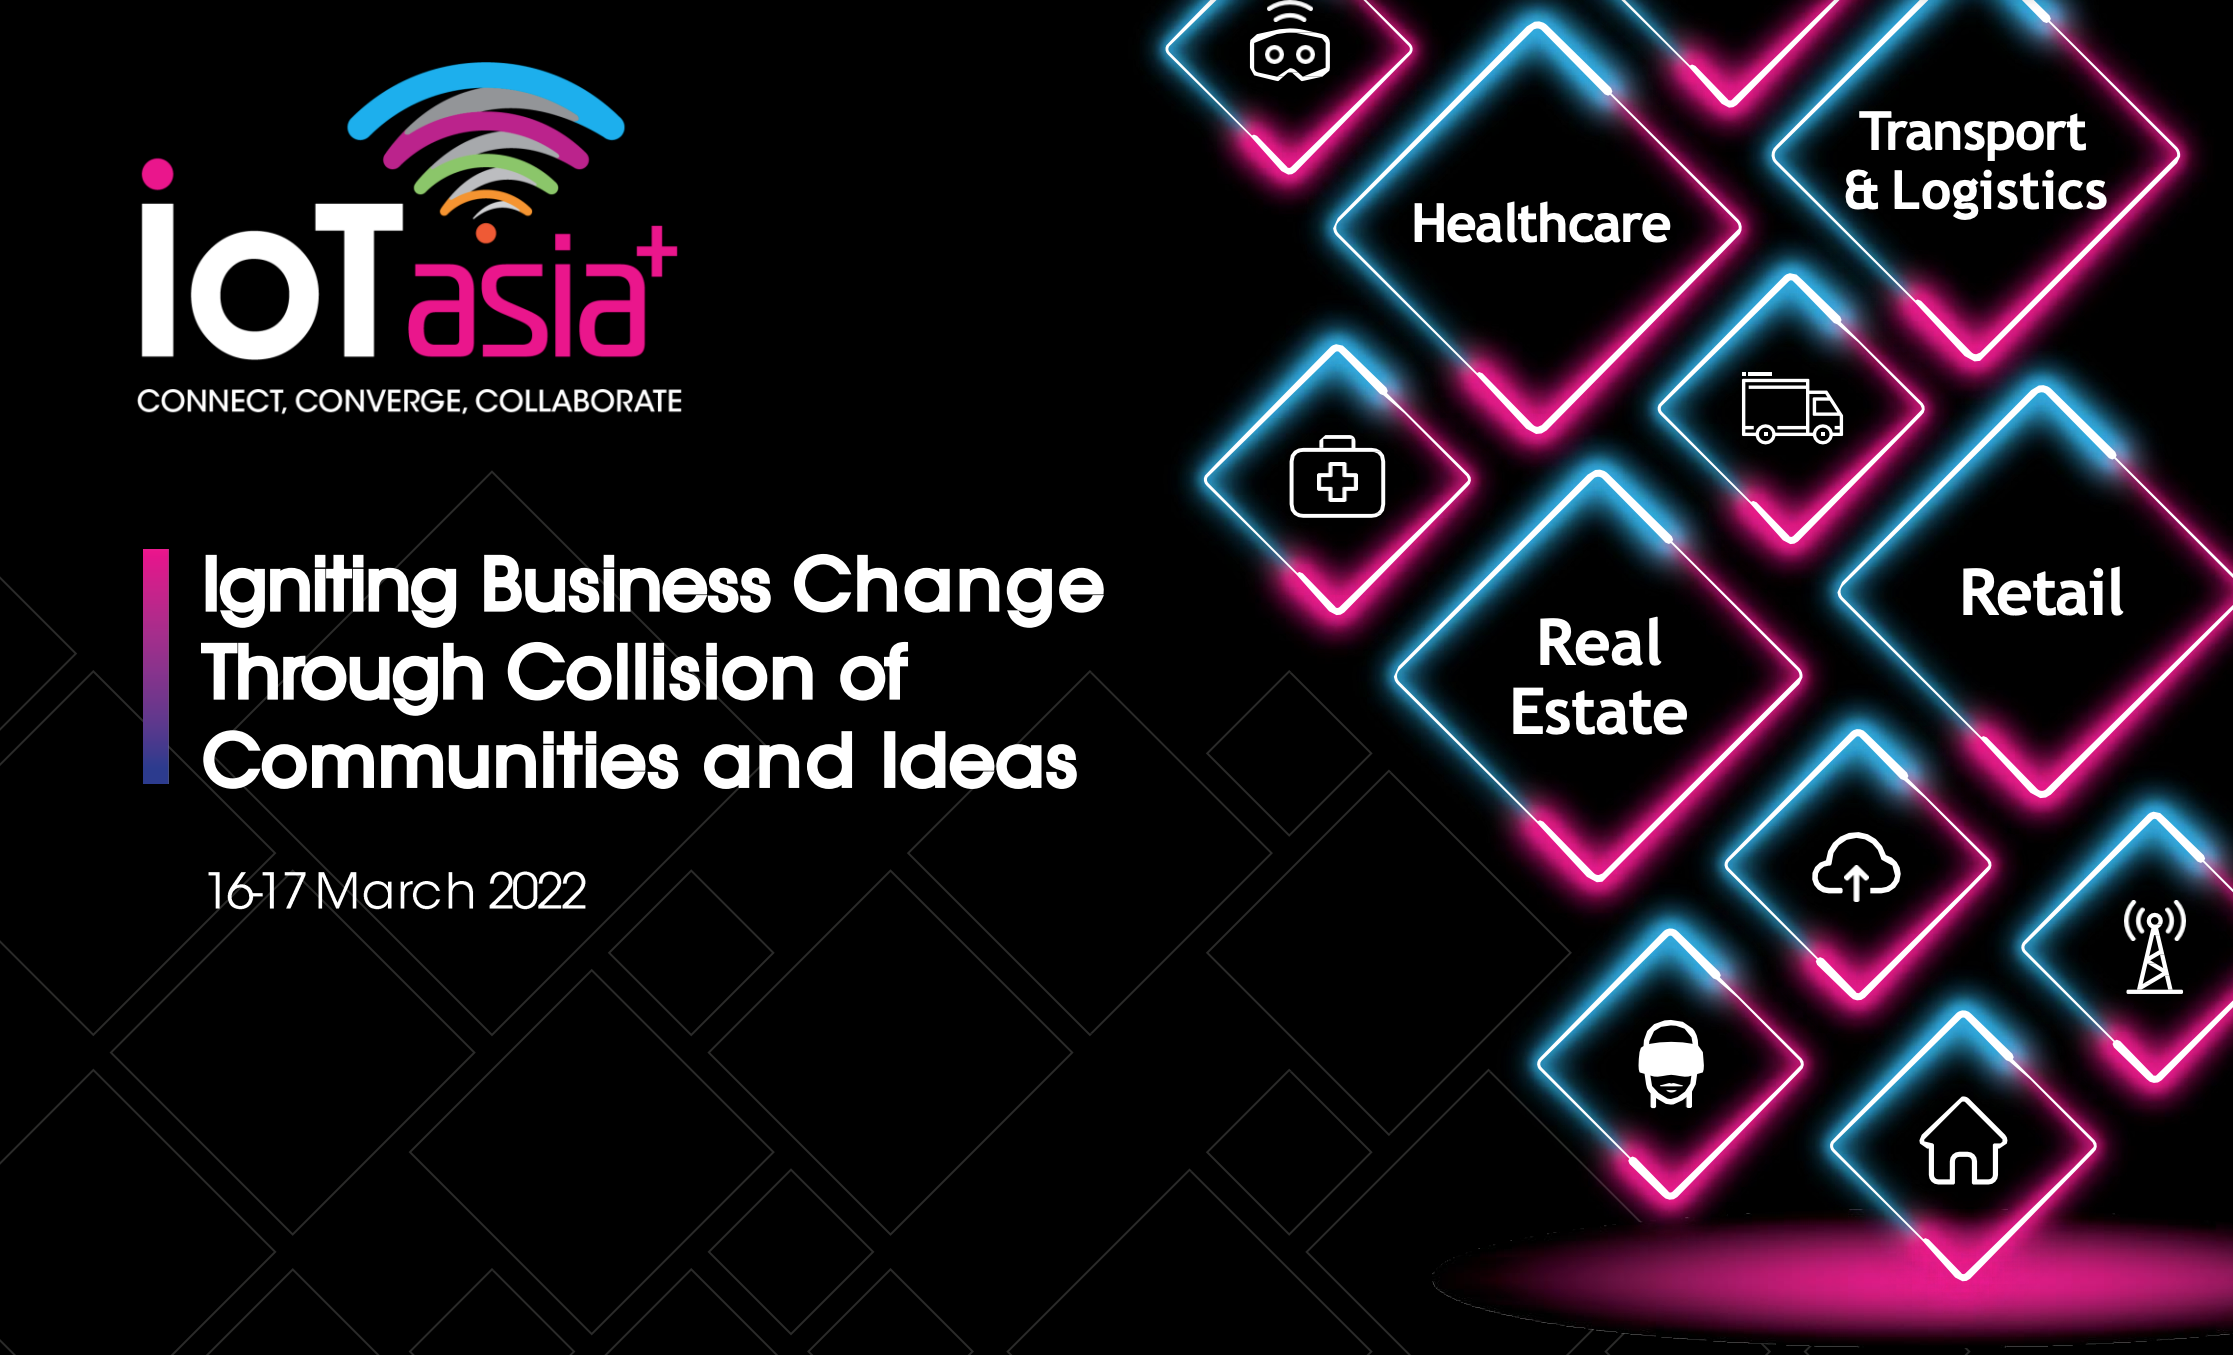 IoT Asia Plus 2022 Conference